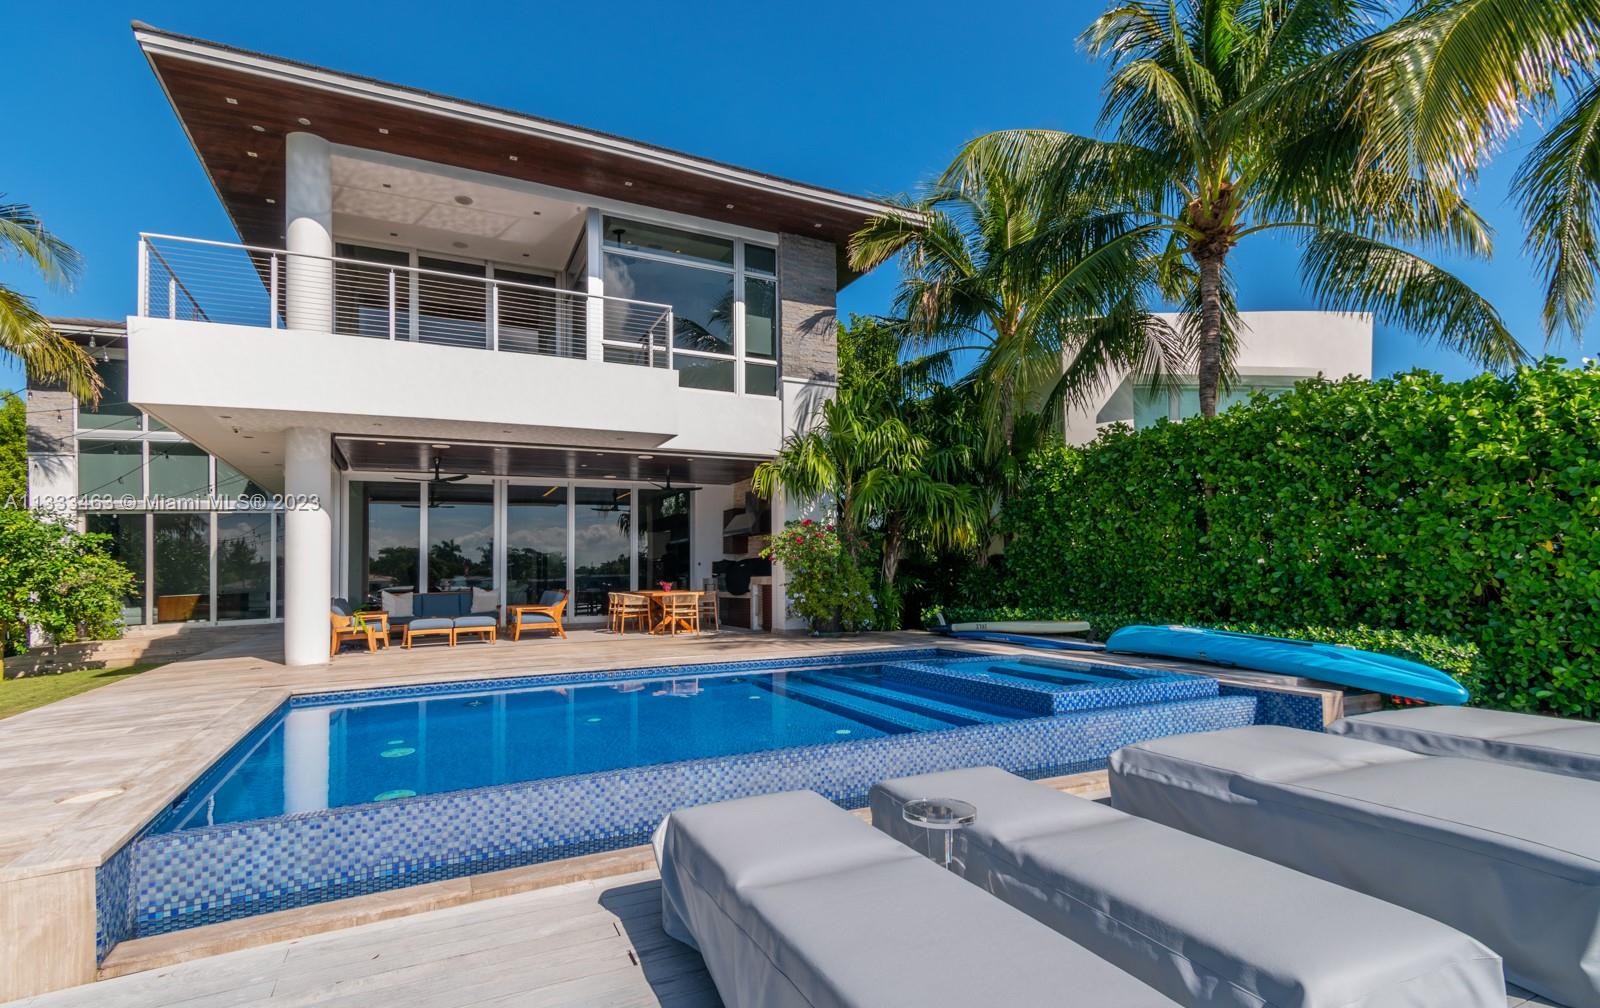 This stunning, modern villa with 7,451 SF of construction and 5,600 SF under A/C is Biscayne Point's most desirable listing. The south-facing, 11,250 SF lot offers a sun-exposed pool all day, 75 FT of waterfront, direct bay views, and ocean access. Built in 2015, but recently updated in 2022, it's a fully integrated smart home powered by Savant. Italian kitchen with Sub-Zero / WOLF appliances. Service quarters with bedroom / bathroom. Outdoor balconies on each bedroom, oversized terrace, infinity pool, manicured lawns and full outdoor summer kitchen - perfect for entertainment. Five minutes from Bal Harbour Shops and 10 minutes from the heart of South Beach. Pls call Juan